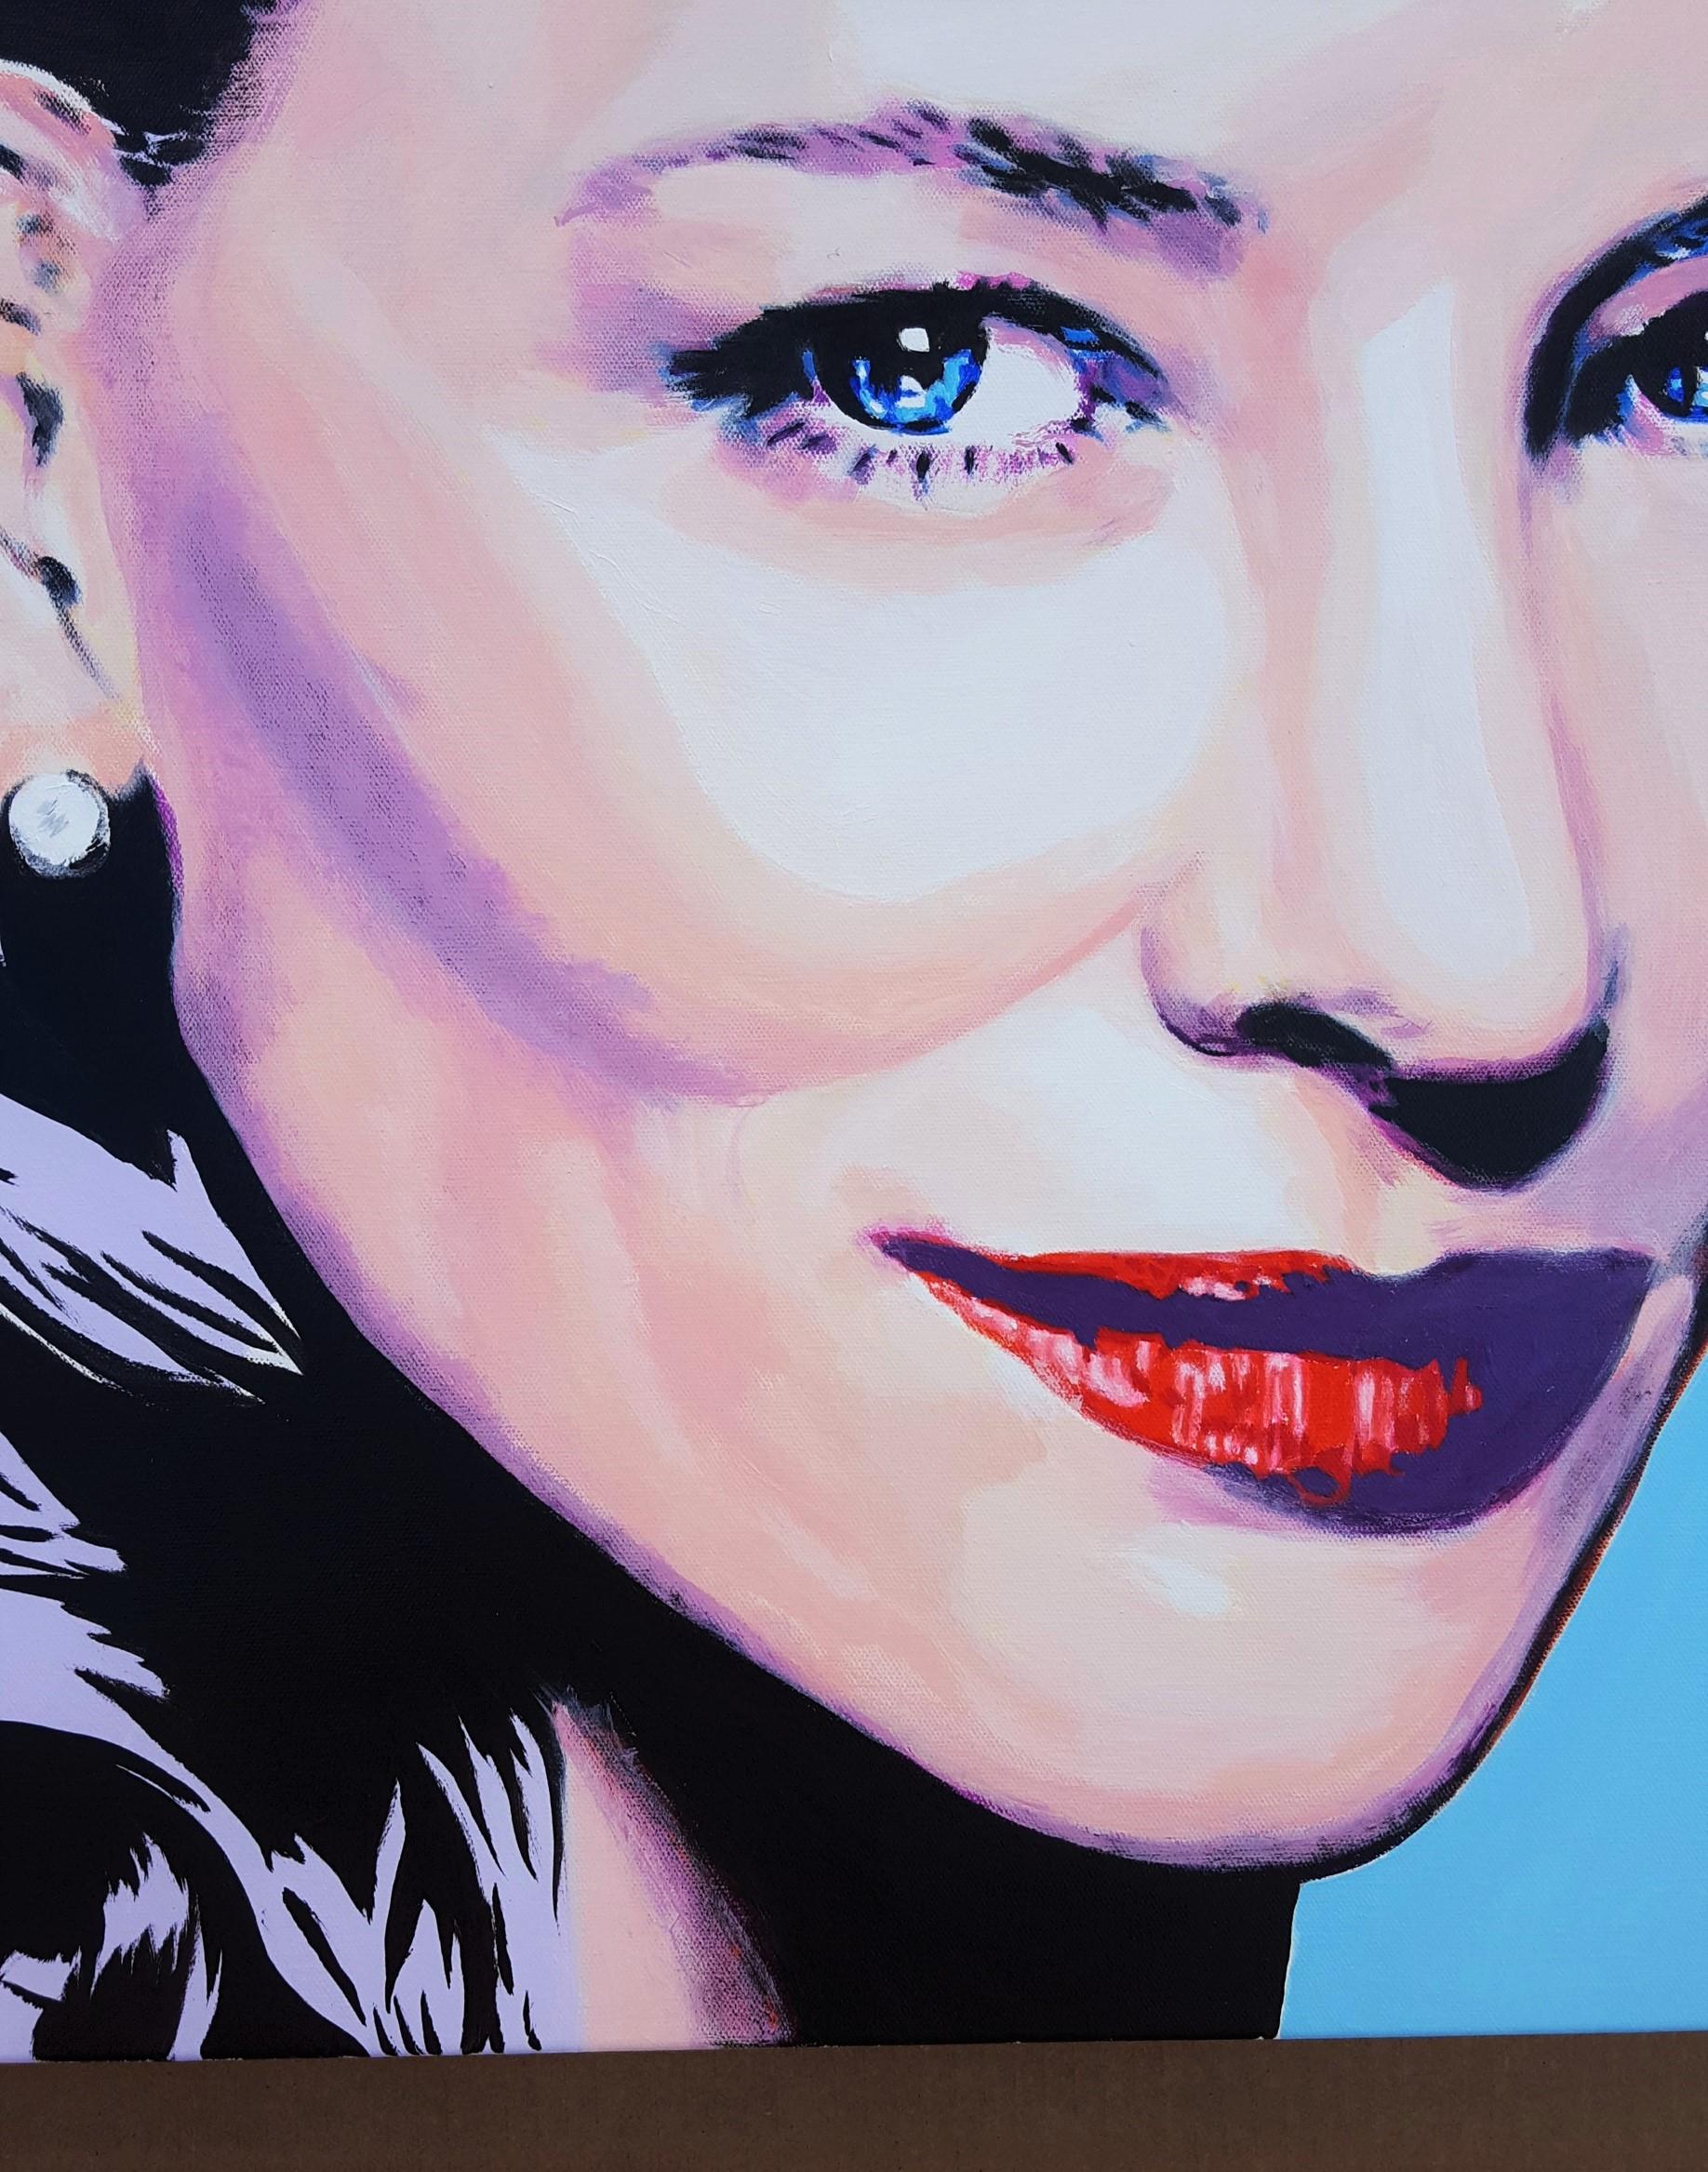 Cate Blanchett Icon II - Blue Portrait Painting by Jack Graves III